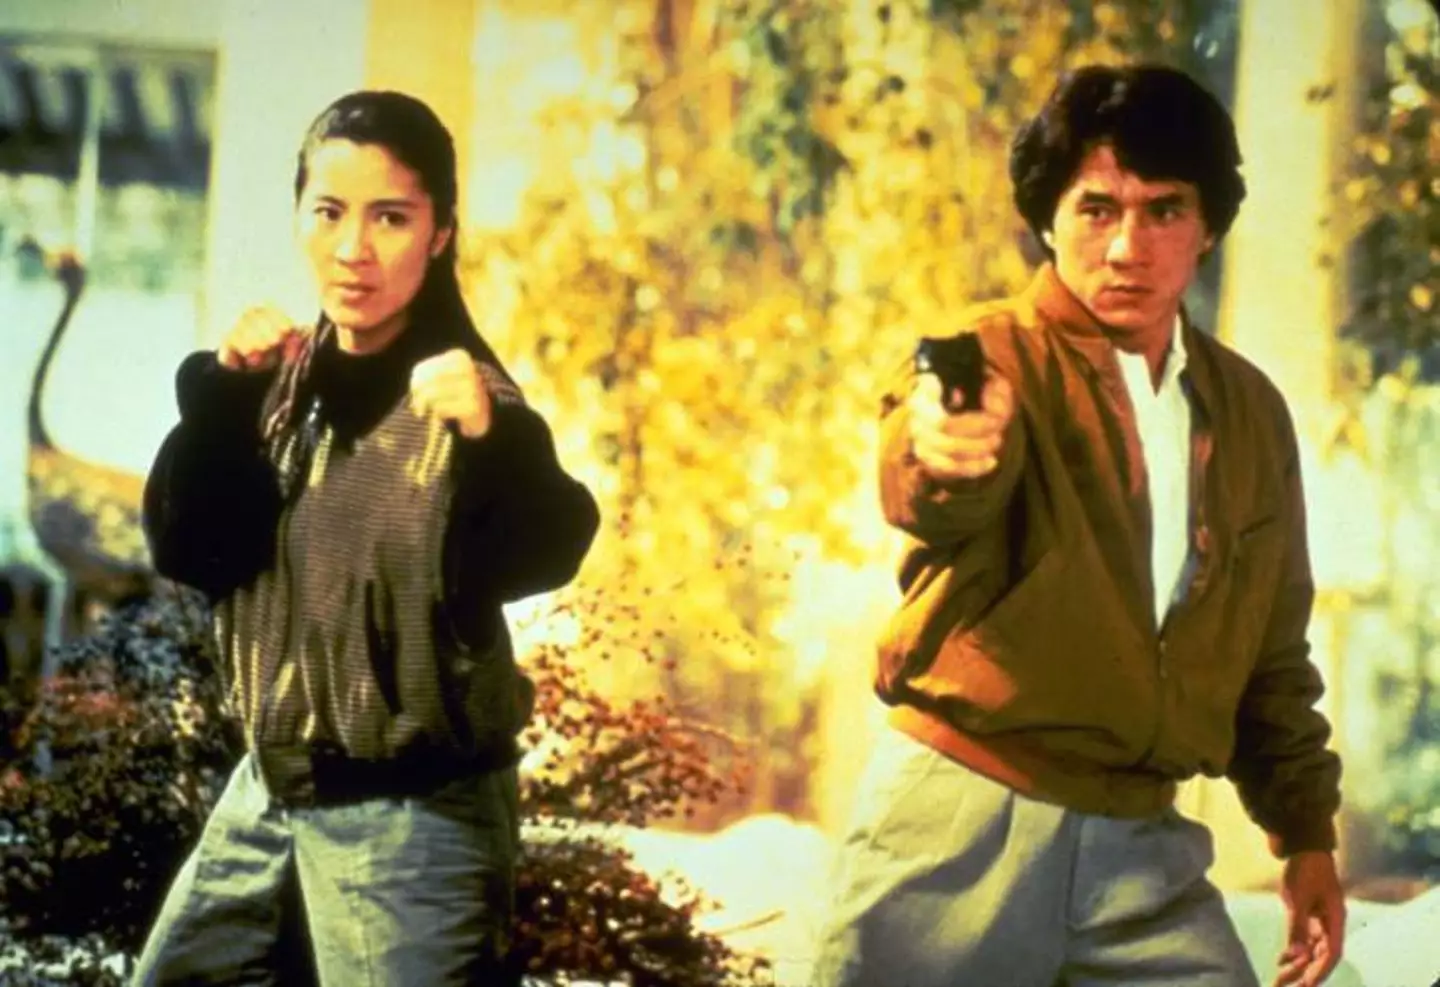 Michelle Yeoh starred alongside Jackie Chan in Police Story 3, also known as Supercop.